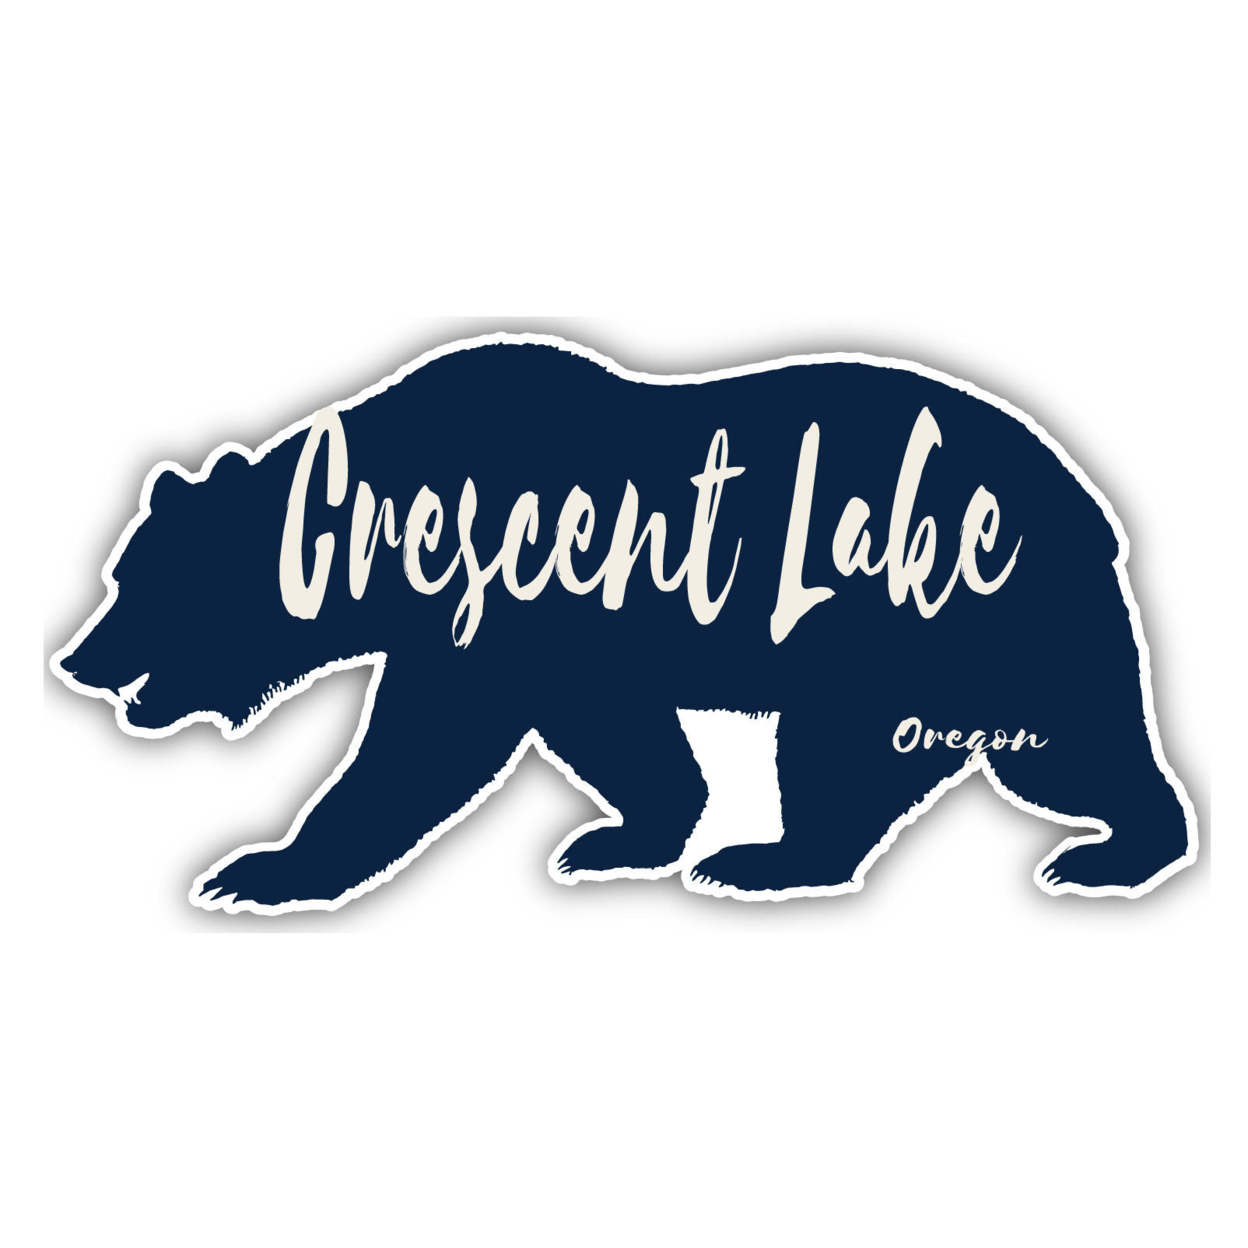 Crescent Lake Oregon Souvenir Decorative Stickers (Choose Theme And Size) - 4-Pack, 10-Inch, Camp Life